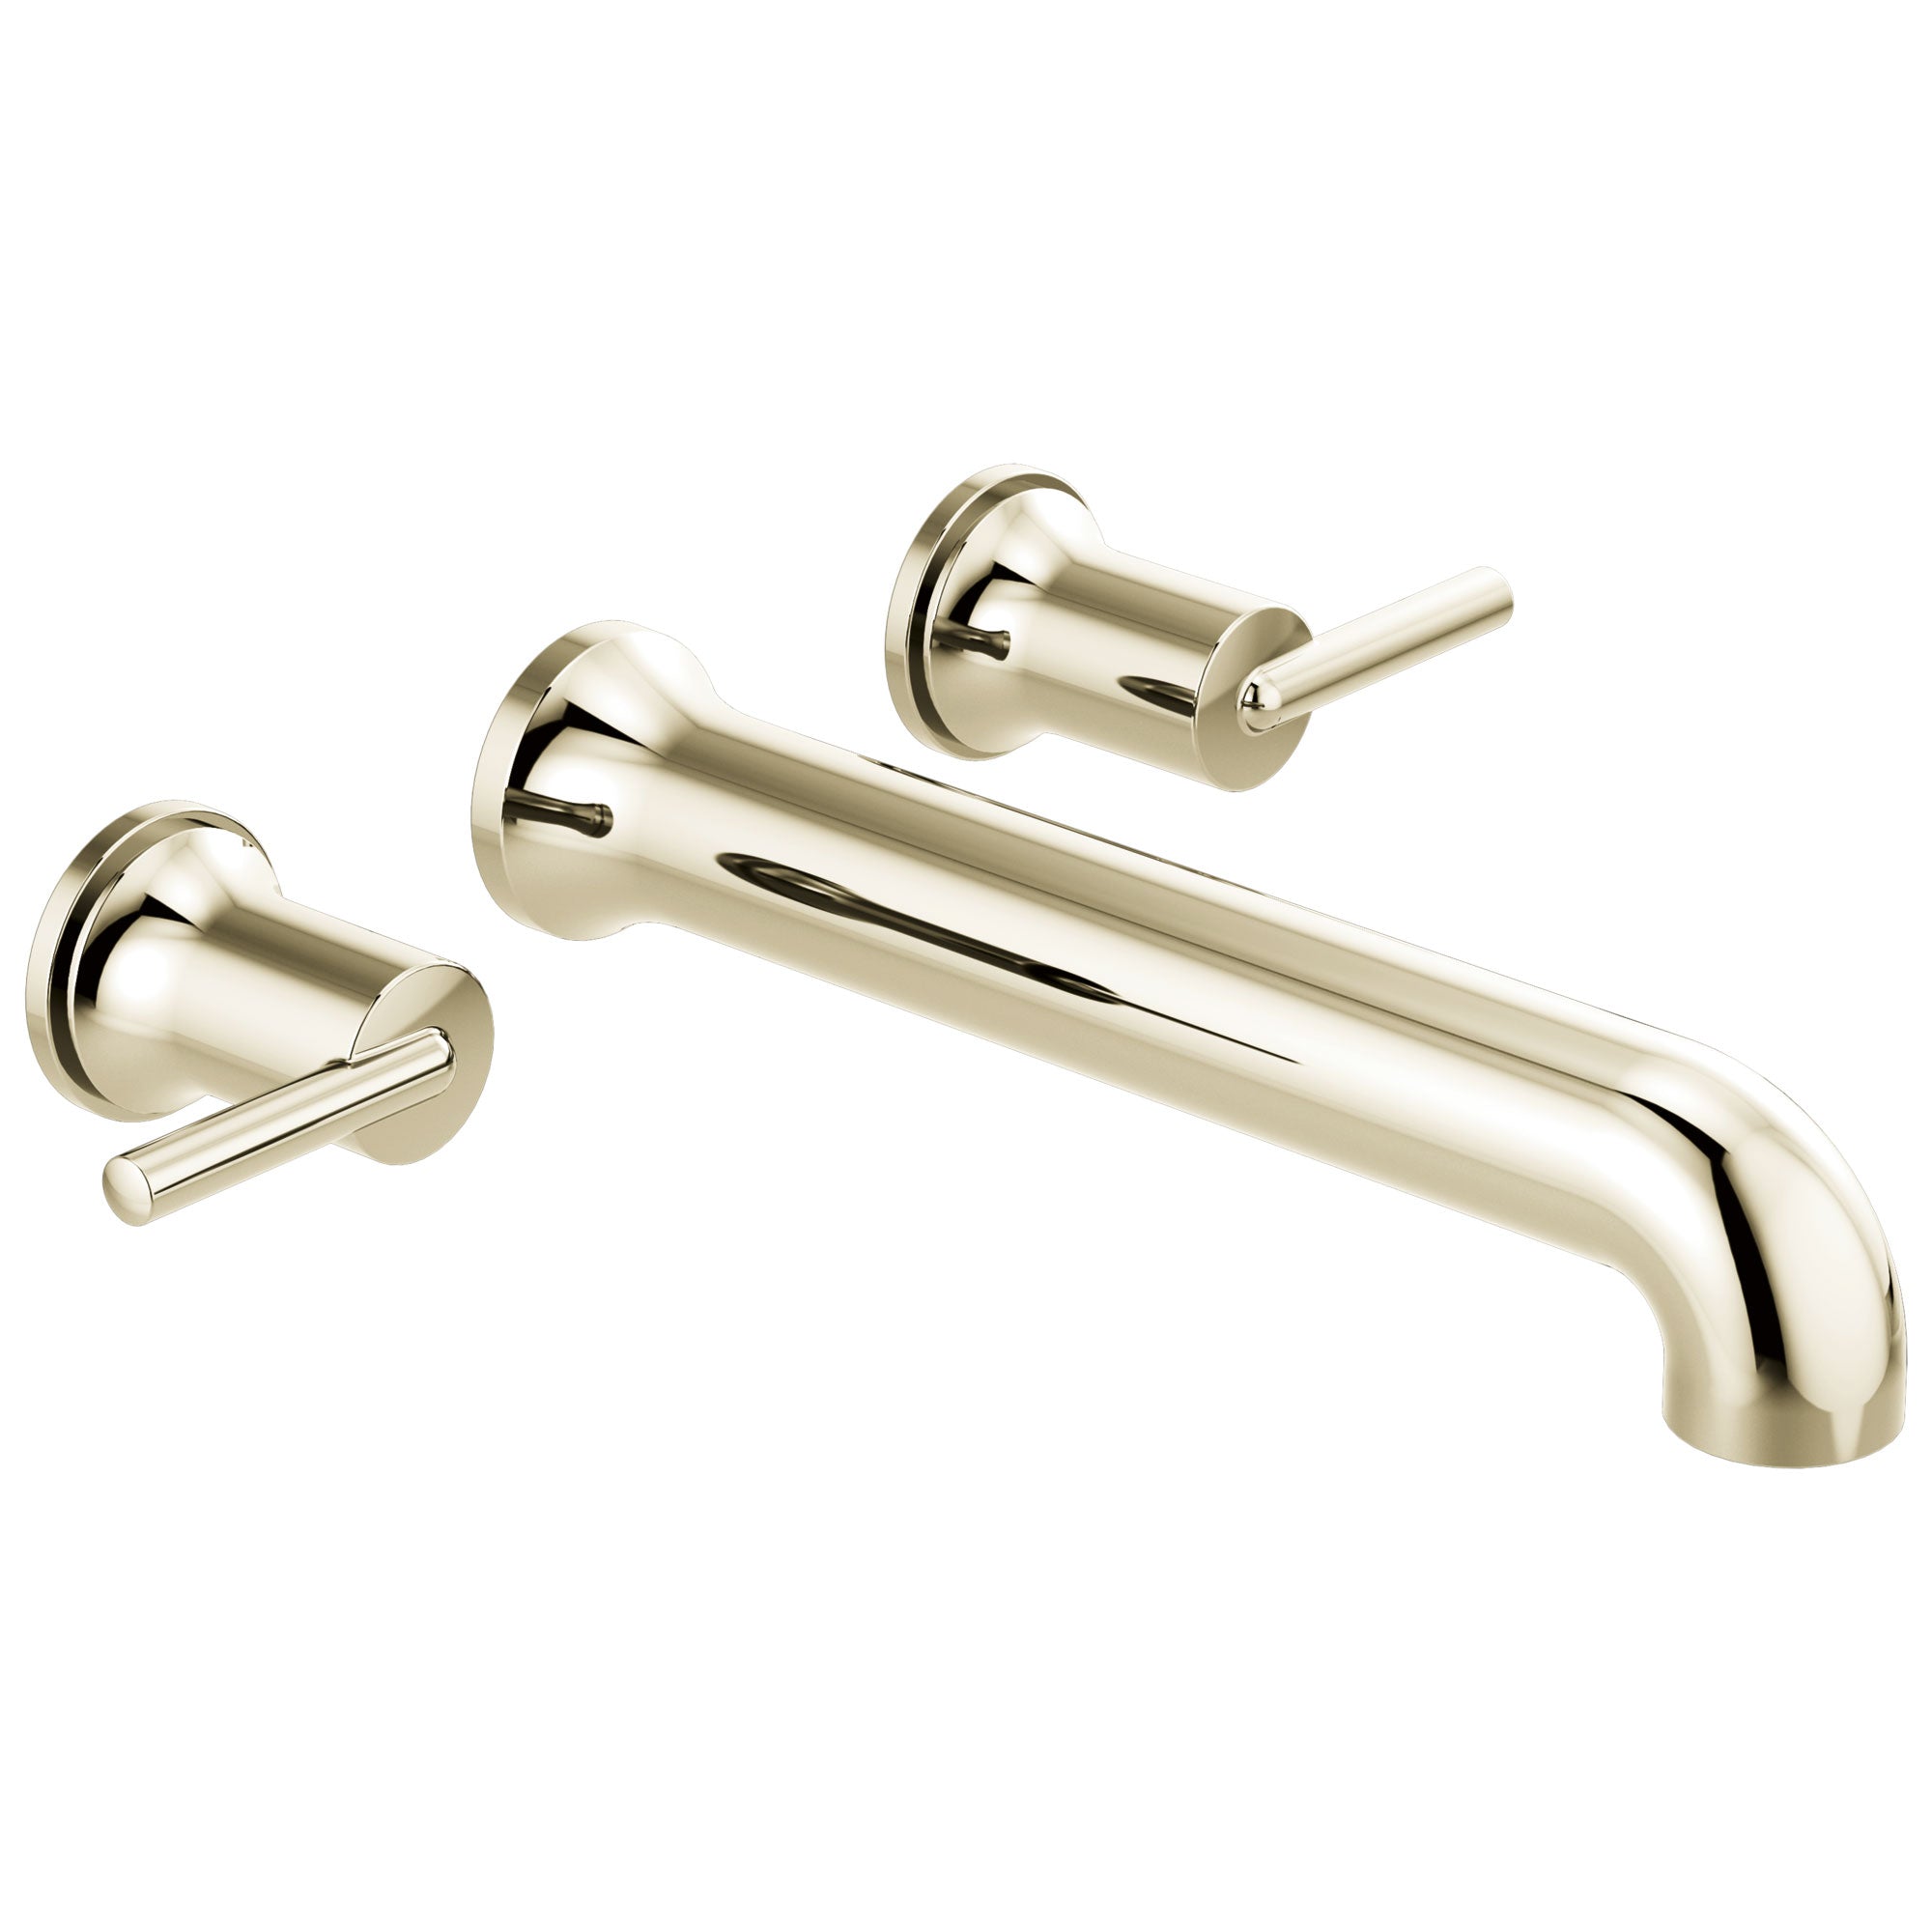 Delta Trinsic Modern Polished Nickel Finish Two Handle Wall Mount Tub Filler Faucet Includes Rough-in Valve D3026V